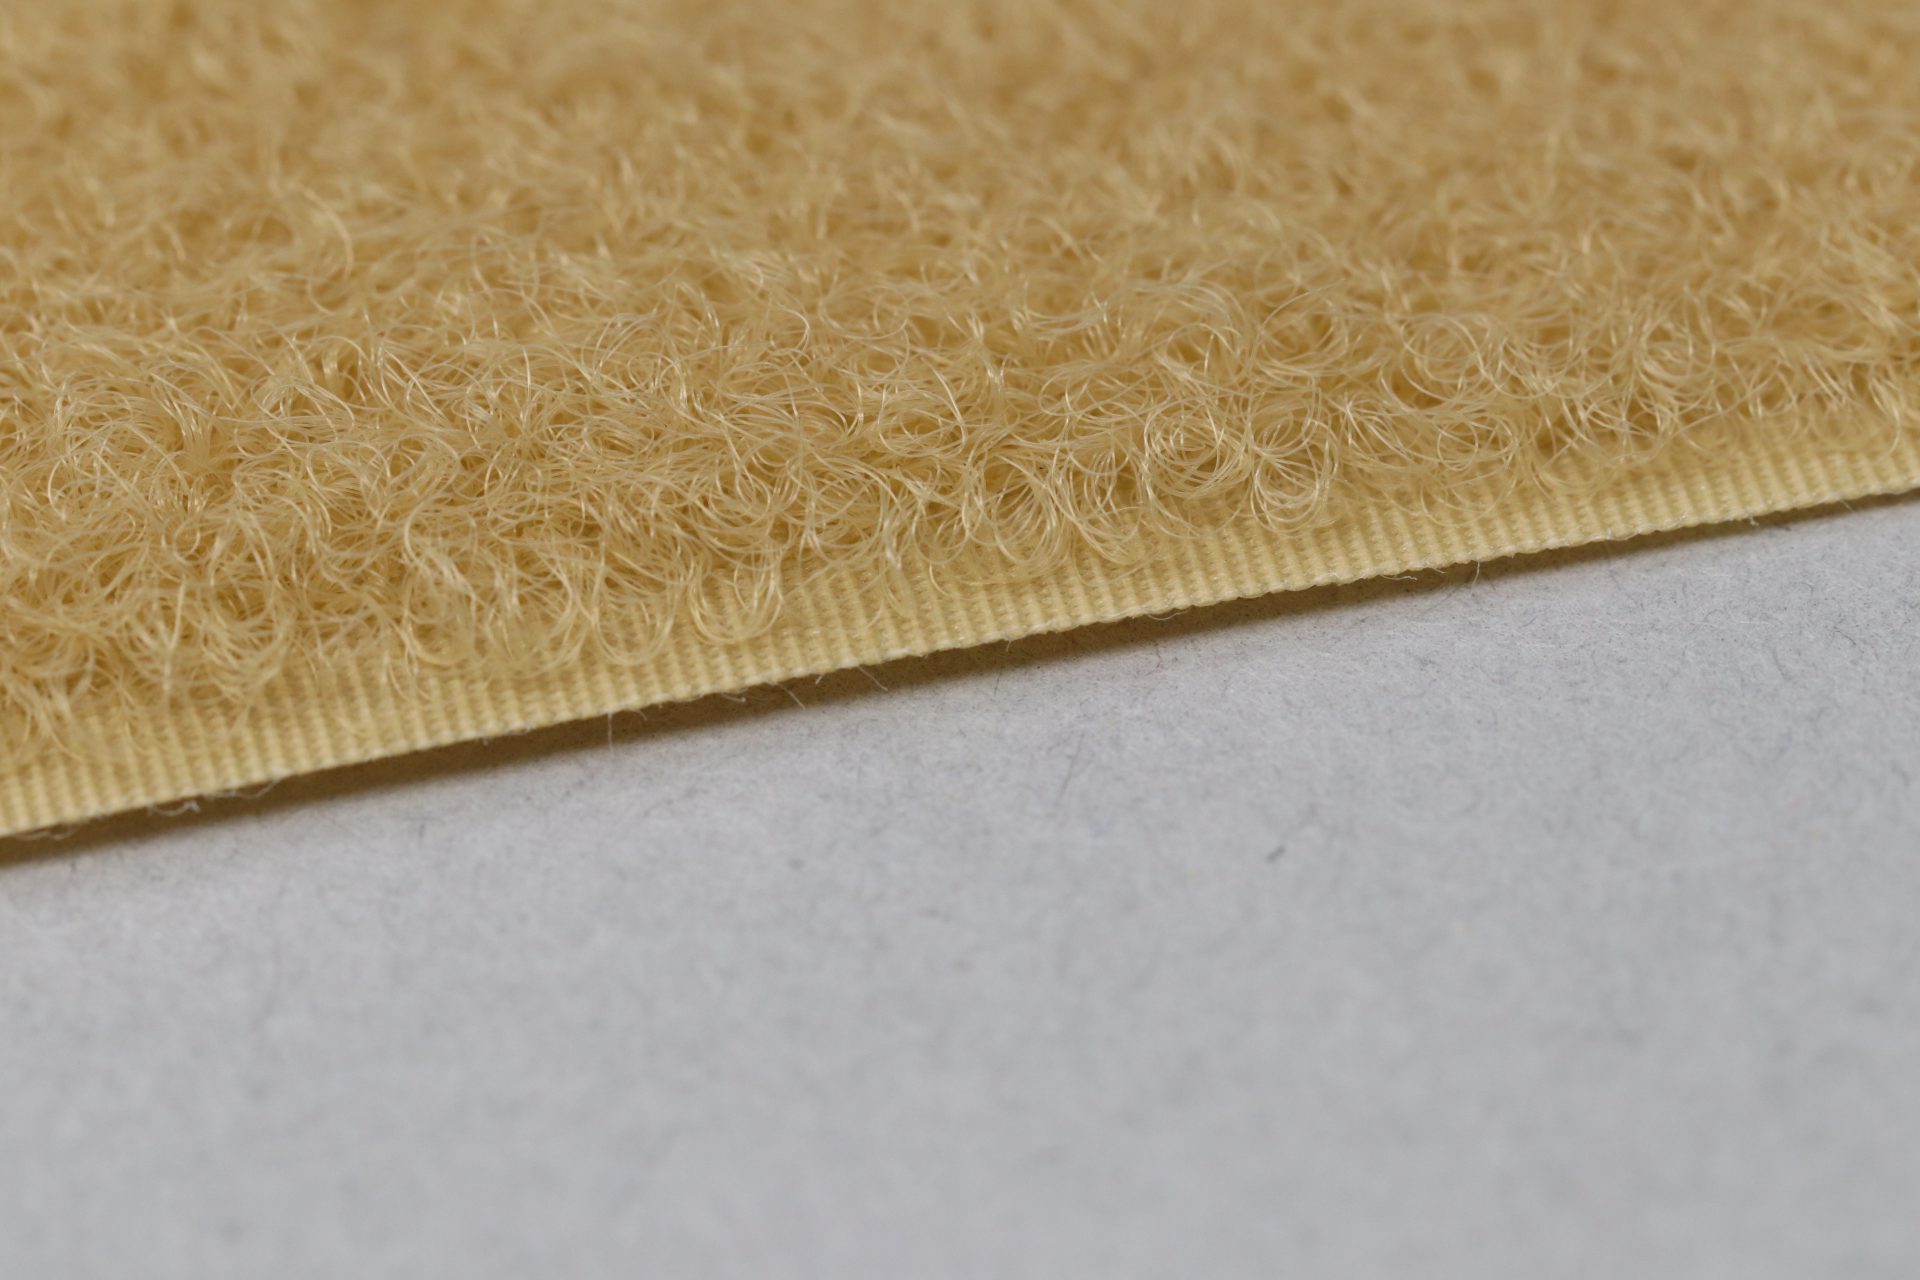 VELCRO(R) Brand STICKY BACK For Fabric Tape .75x24-Beige